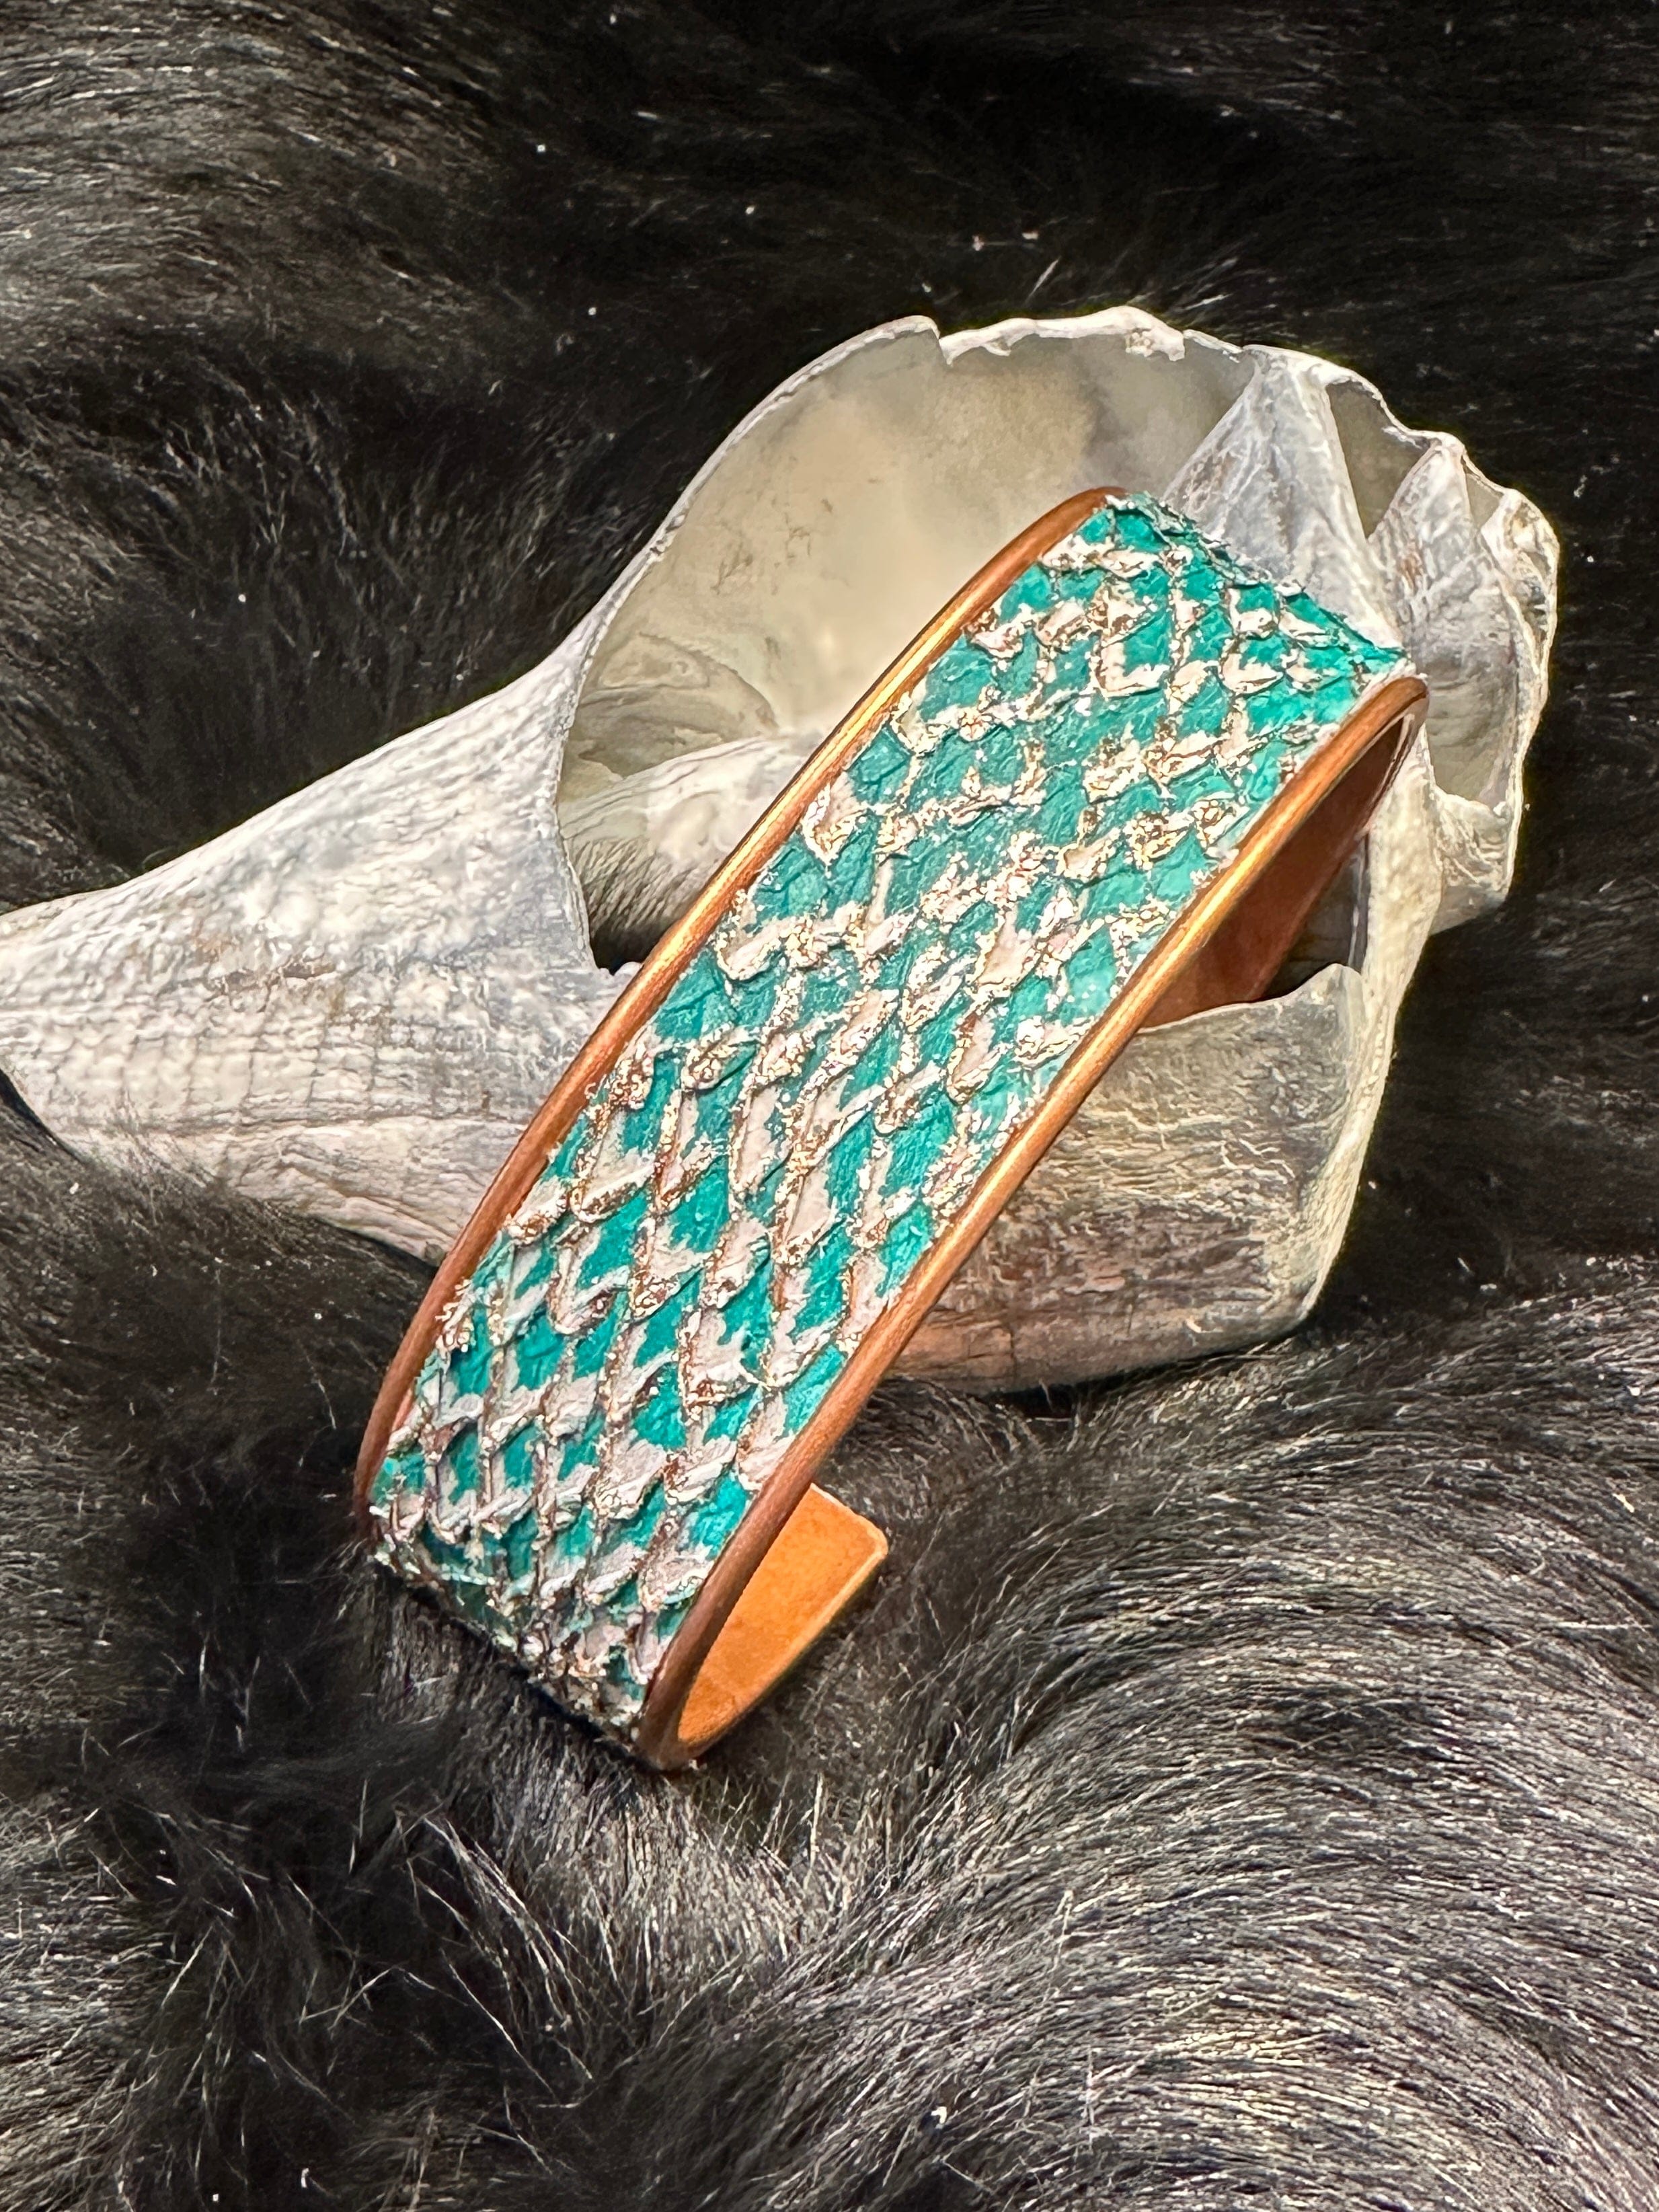 Bridger Leather Cuff Bracelet 3/4" wide / Turquoise salmon leather with copper leaf / Matte Copper Salmon Fish Leather Cuff Bracelets - Assorted sizes